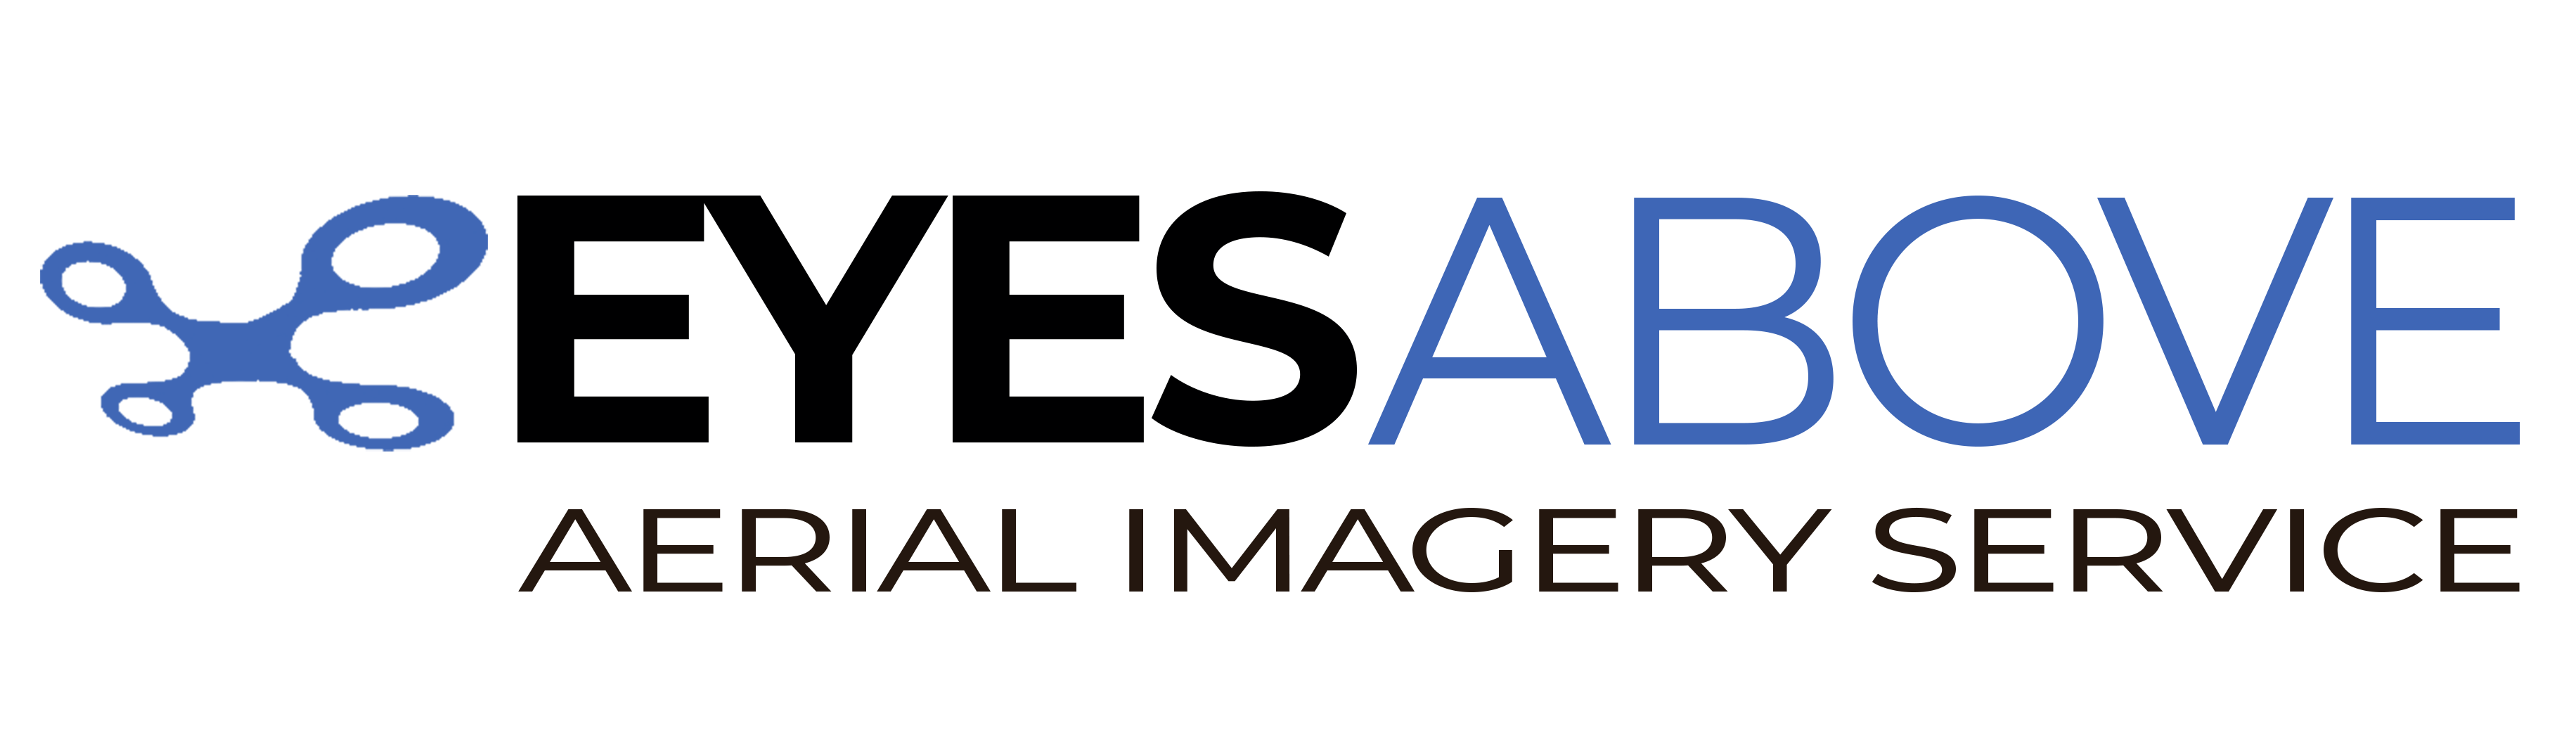 Eyes Above Marketing | Video & Imagery Services